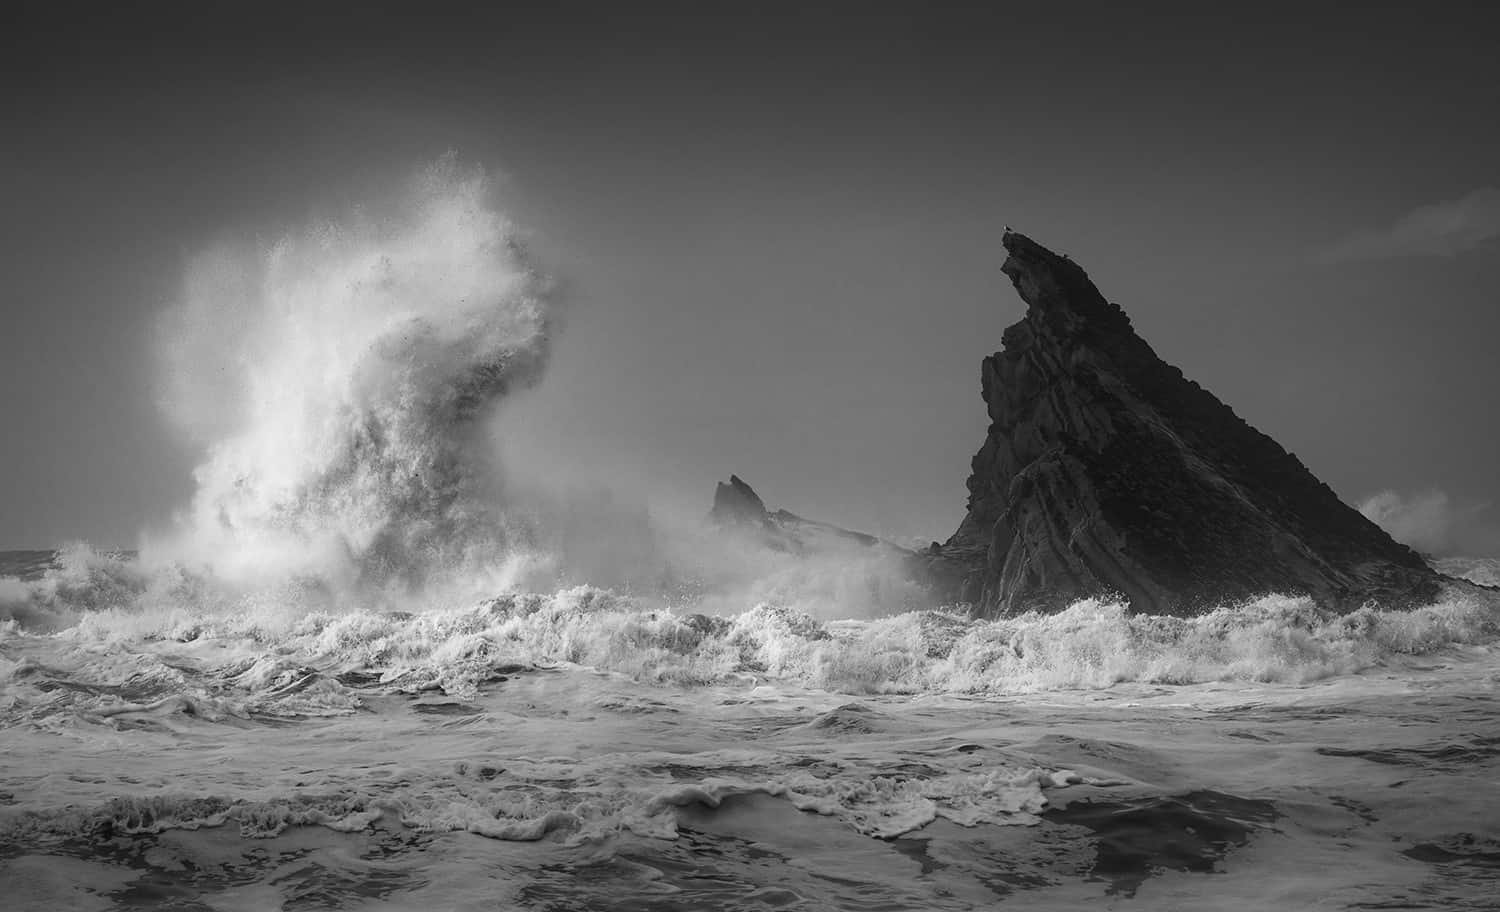 Rachael Talibart's 'Face-off' catches a wave towering against black rock on the coast of Oregon. Press photo courtesy of the Sohn Gallery